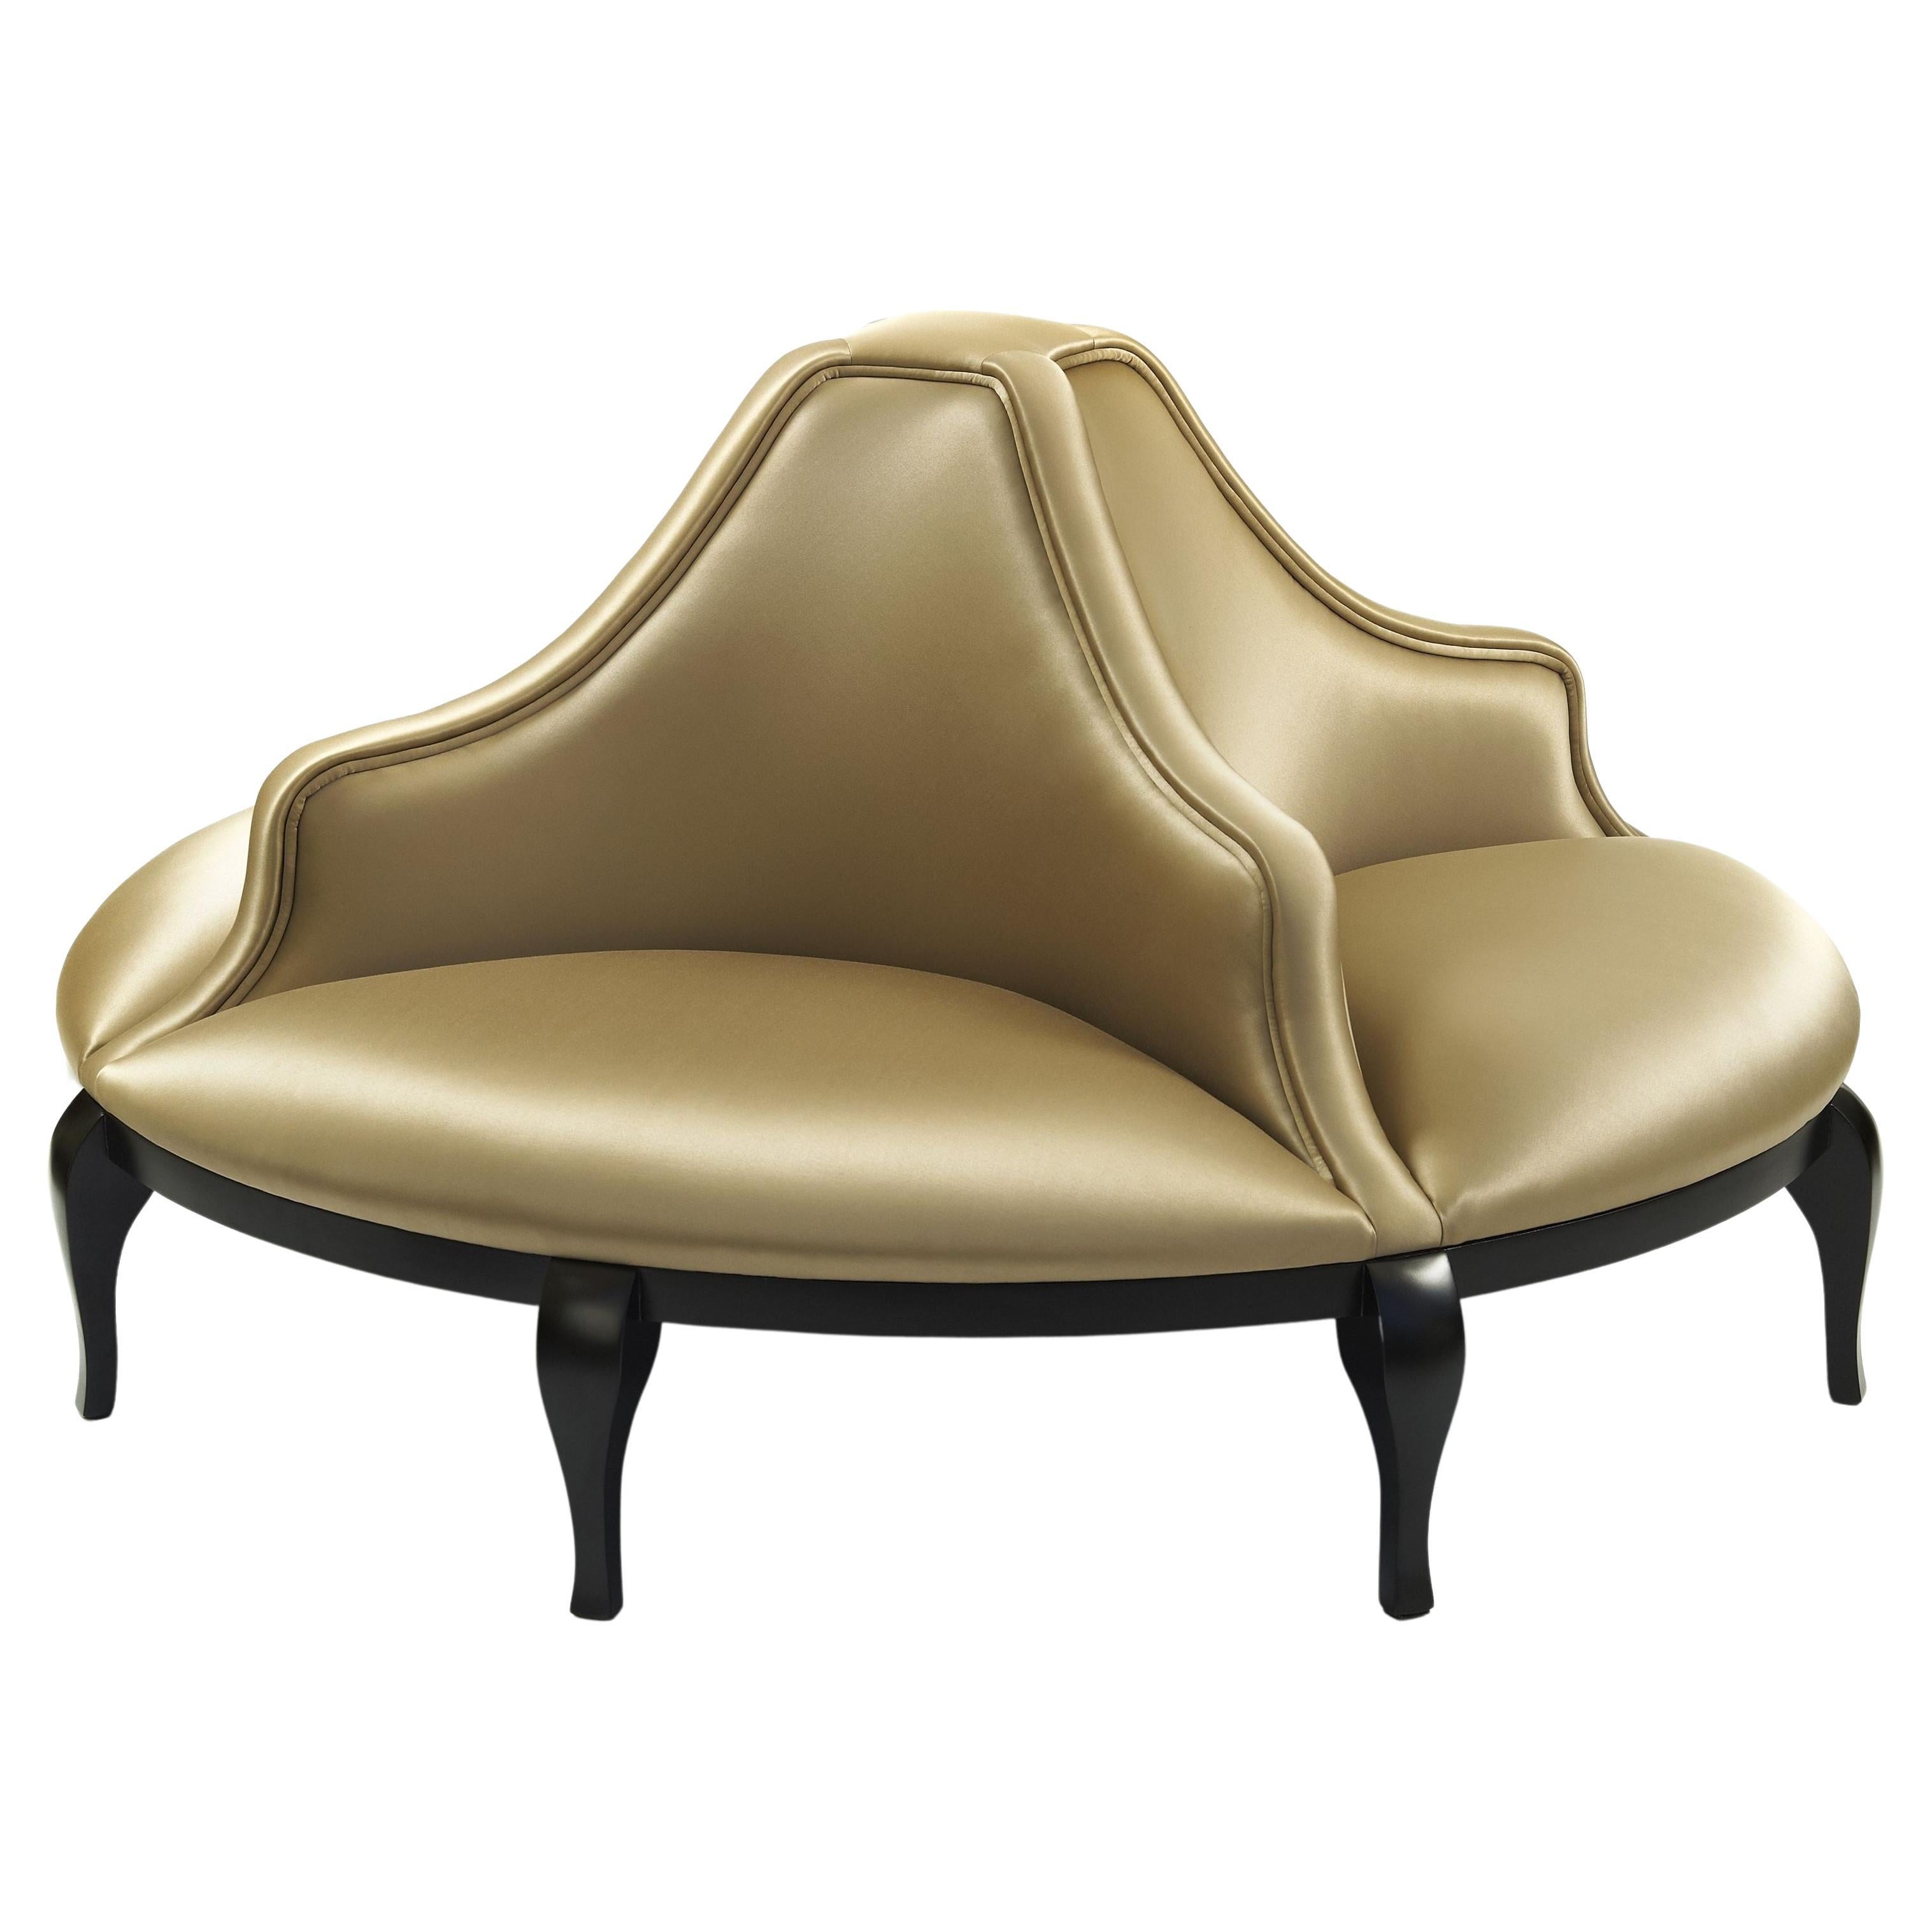 This round sofa is a revisited icon from the Victorian Era. Bright, light and feminine, this opulent signature piece is the perfect setting for a flirting scene from any given British literature classic. It serves as a bold design element in the